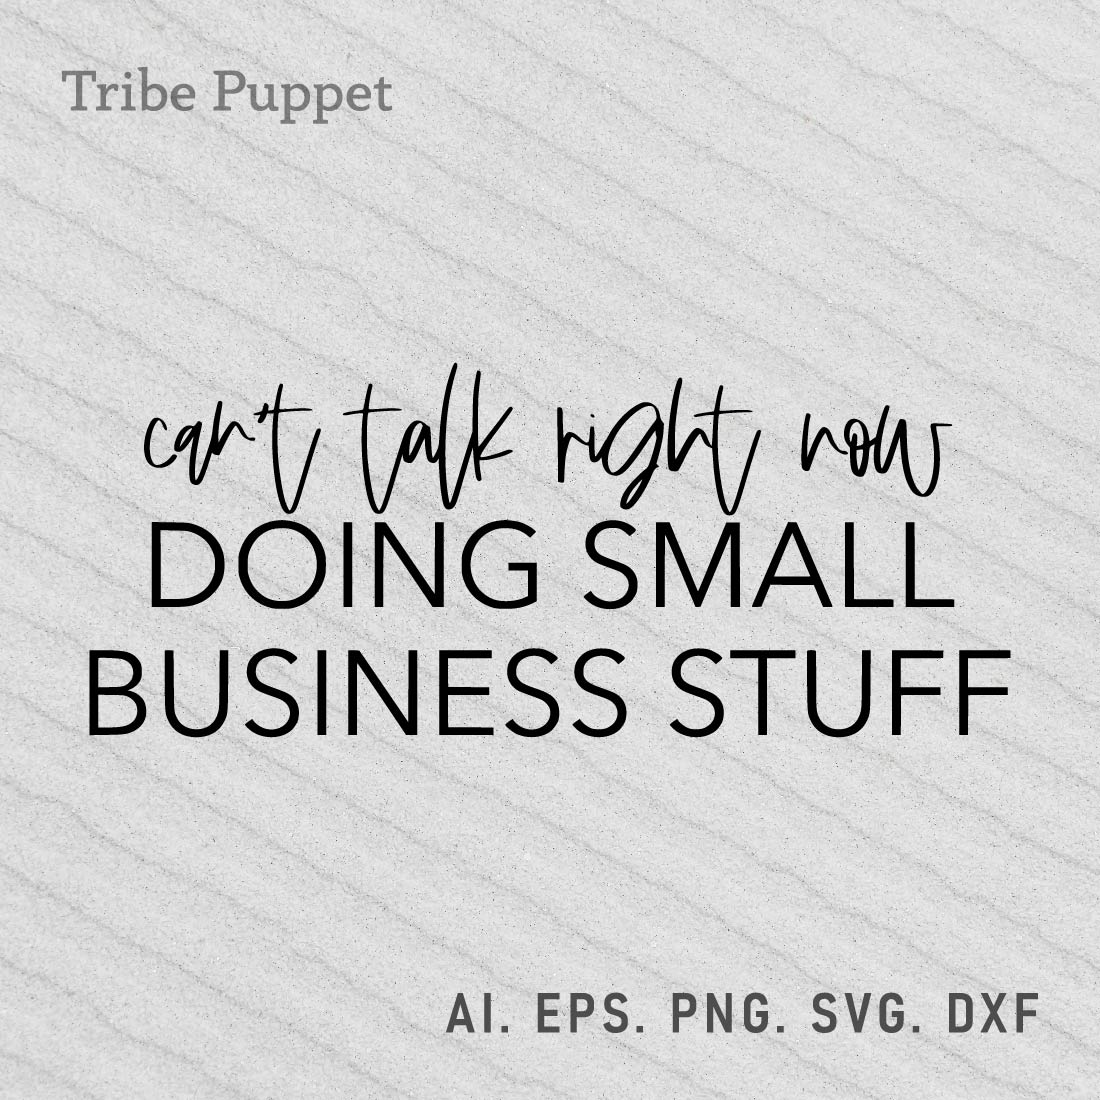 Small business Quotes preview image.